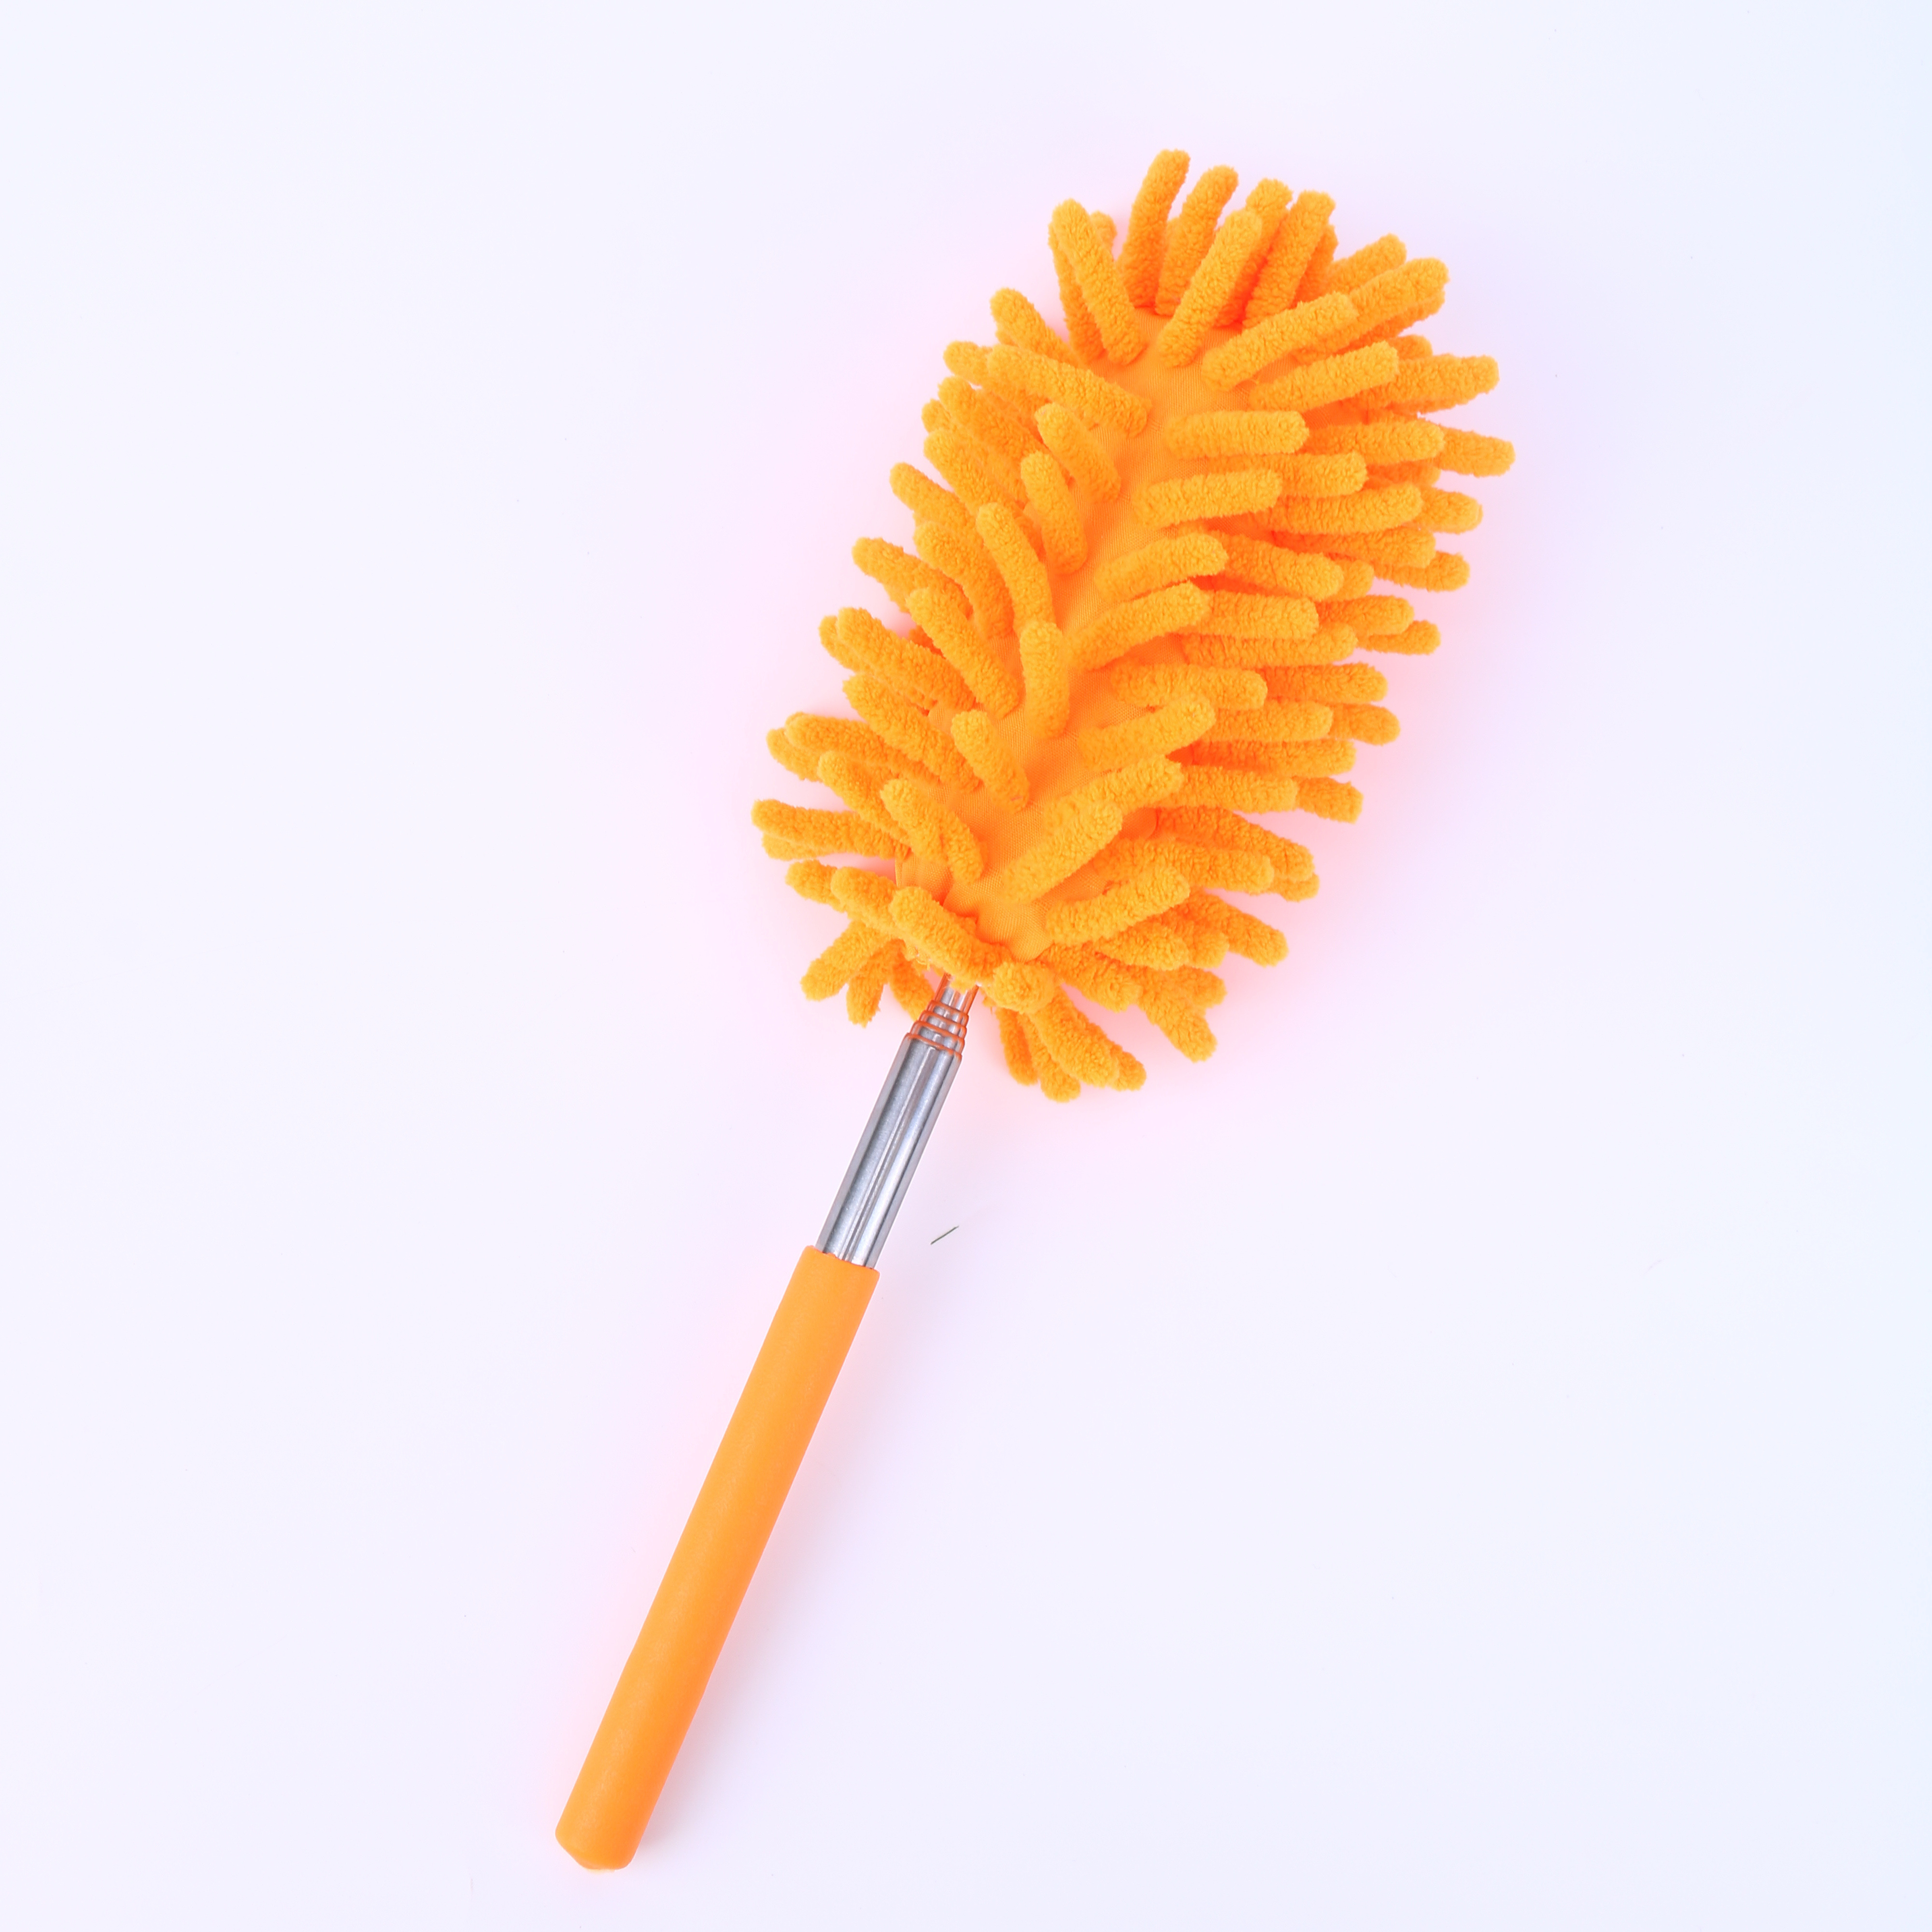 1pc Hand Washable Microfiber Duster - Extendable Pole And